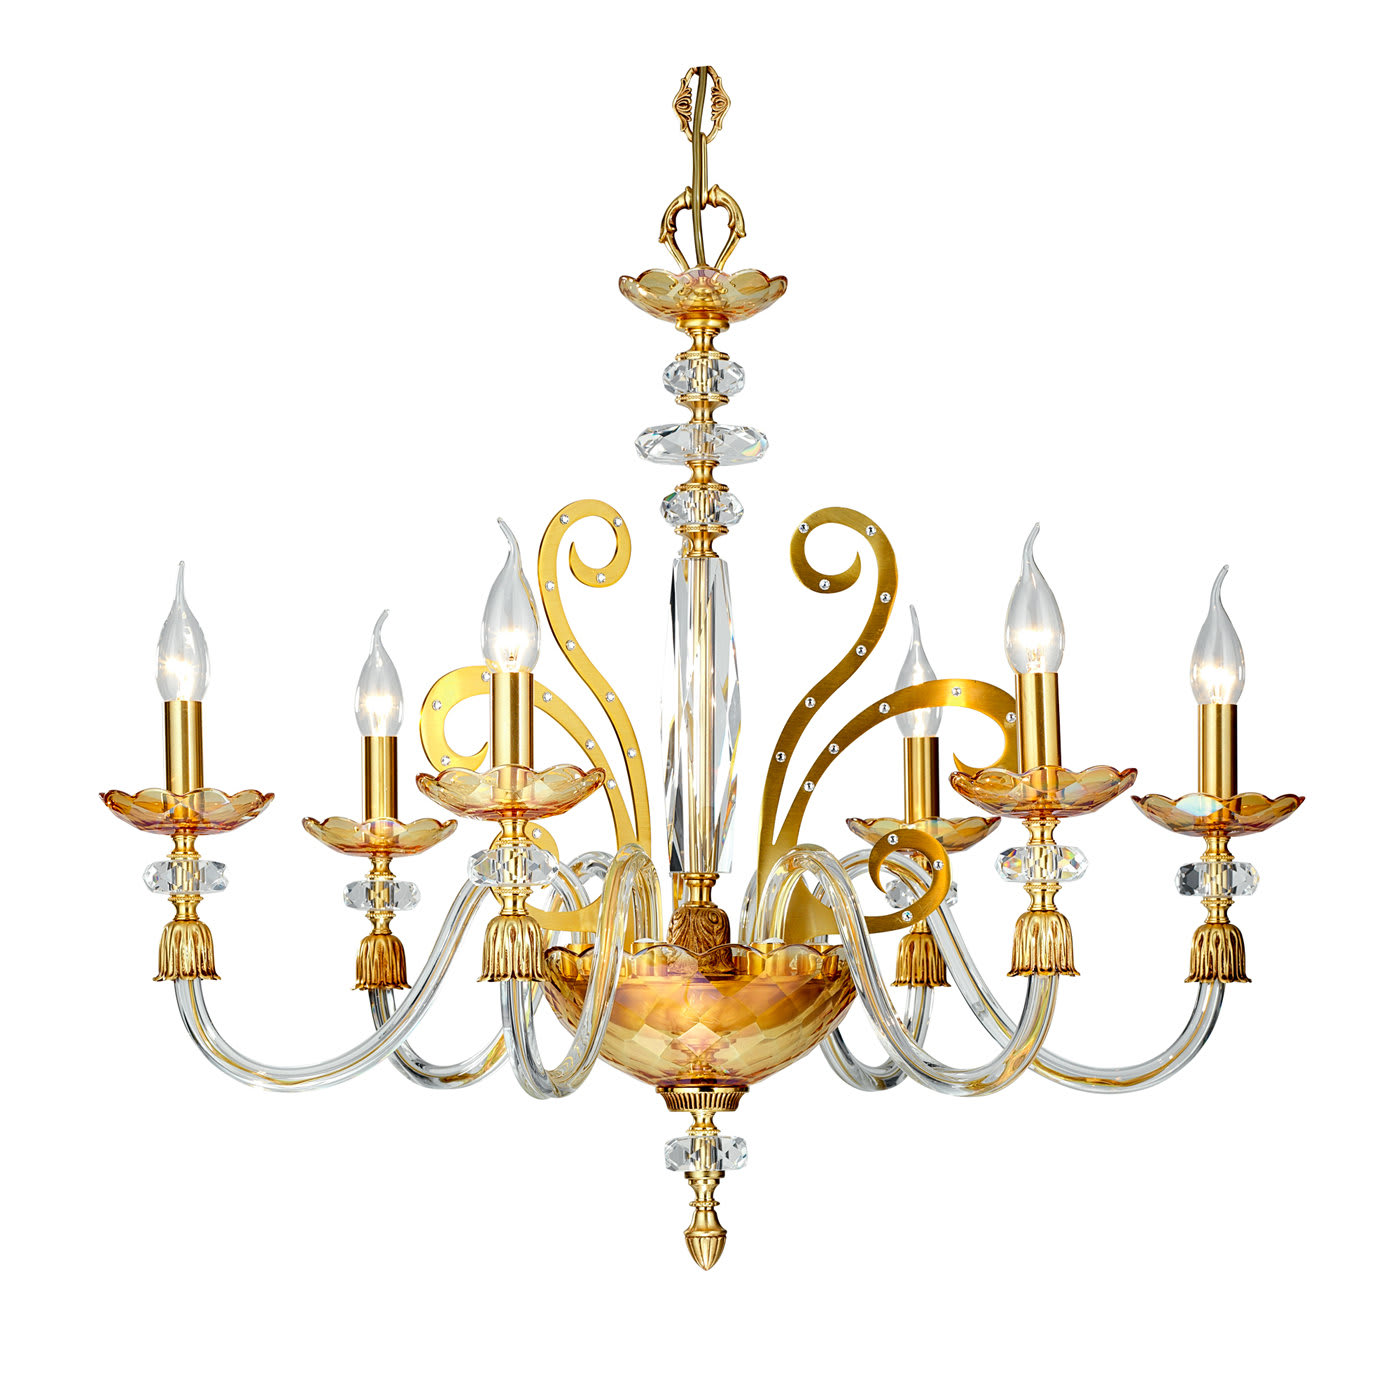 6 light chandelier in glass and gold - Modenese Gastone